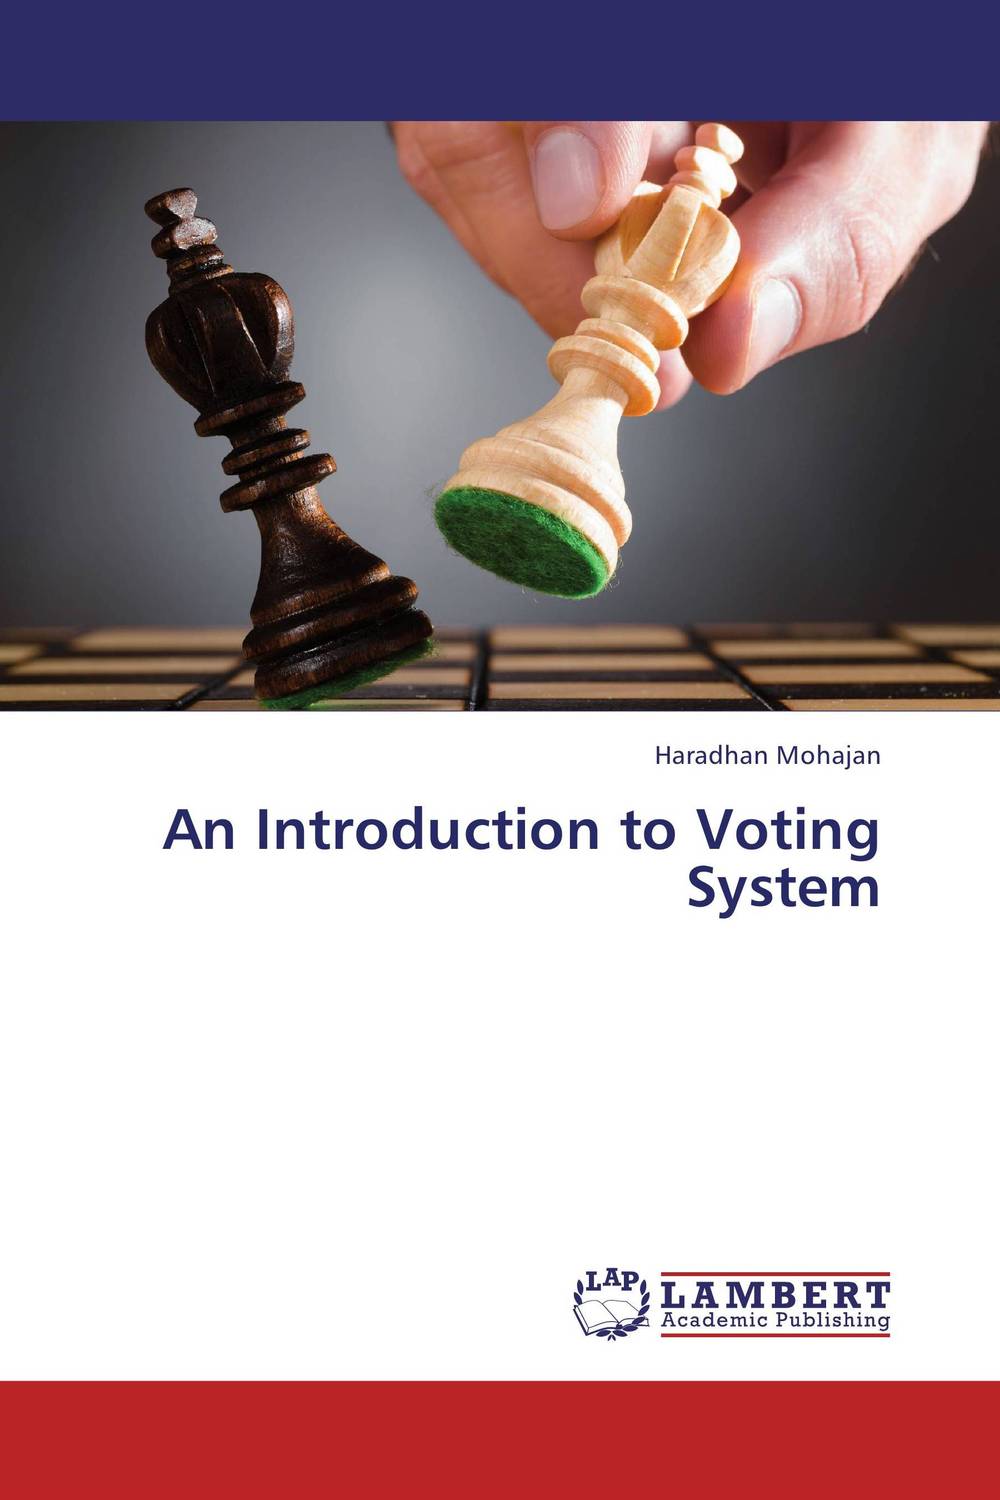 An Introduction to Voting System